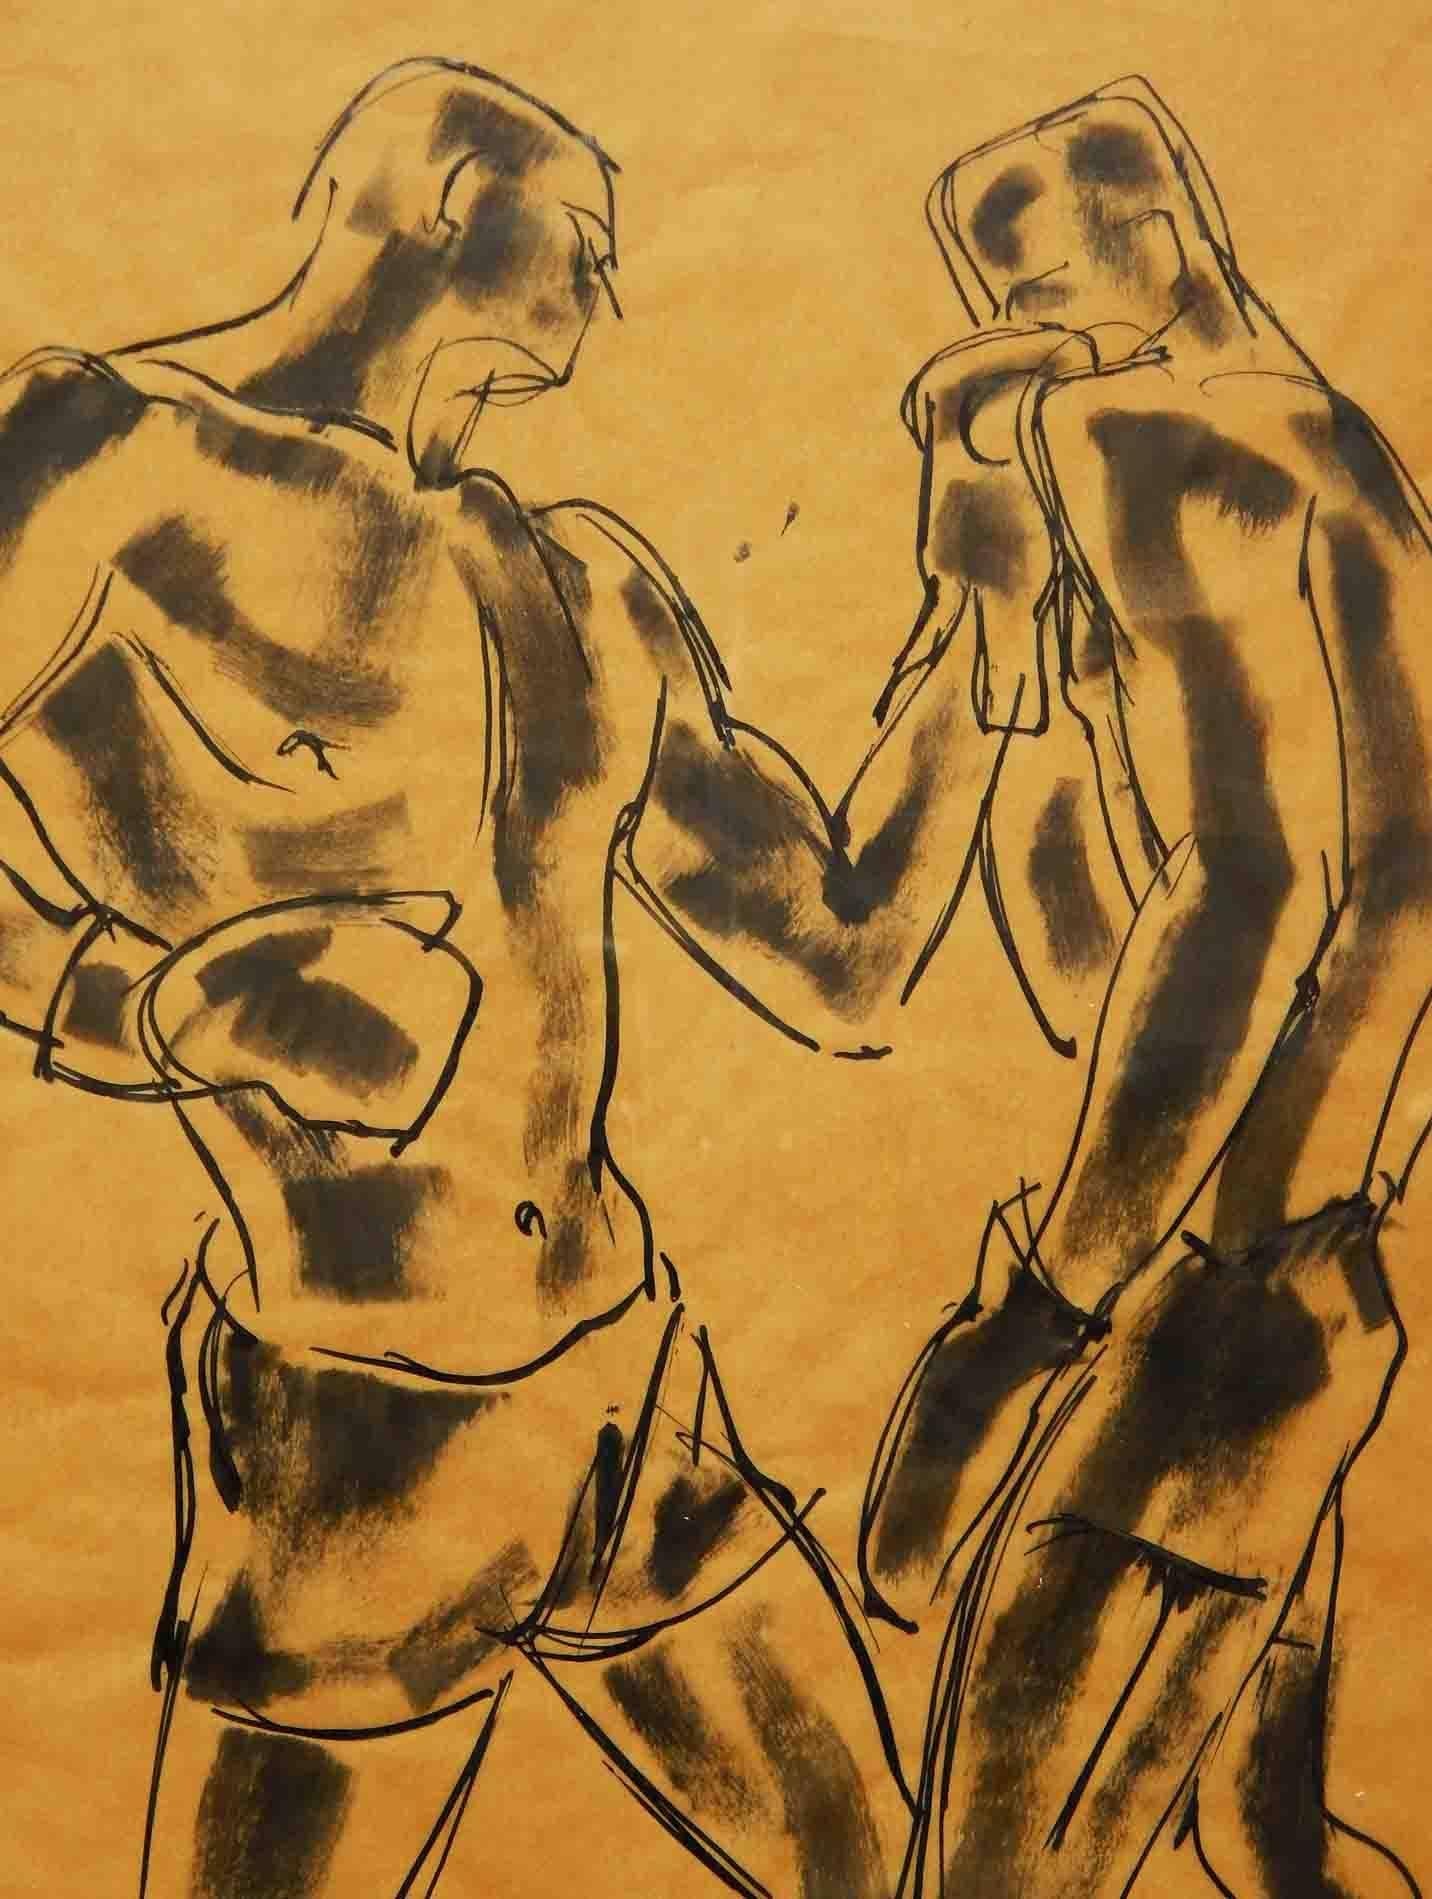 William Littlefield was fascinated by boxers, capturing them again and again in the 1920s and 1930s, issuing a set of prints and producing a series of vivid, arresting drawings. Each drawing shows his ability to economically make use of broad stokes